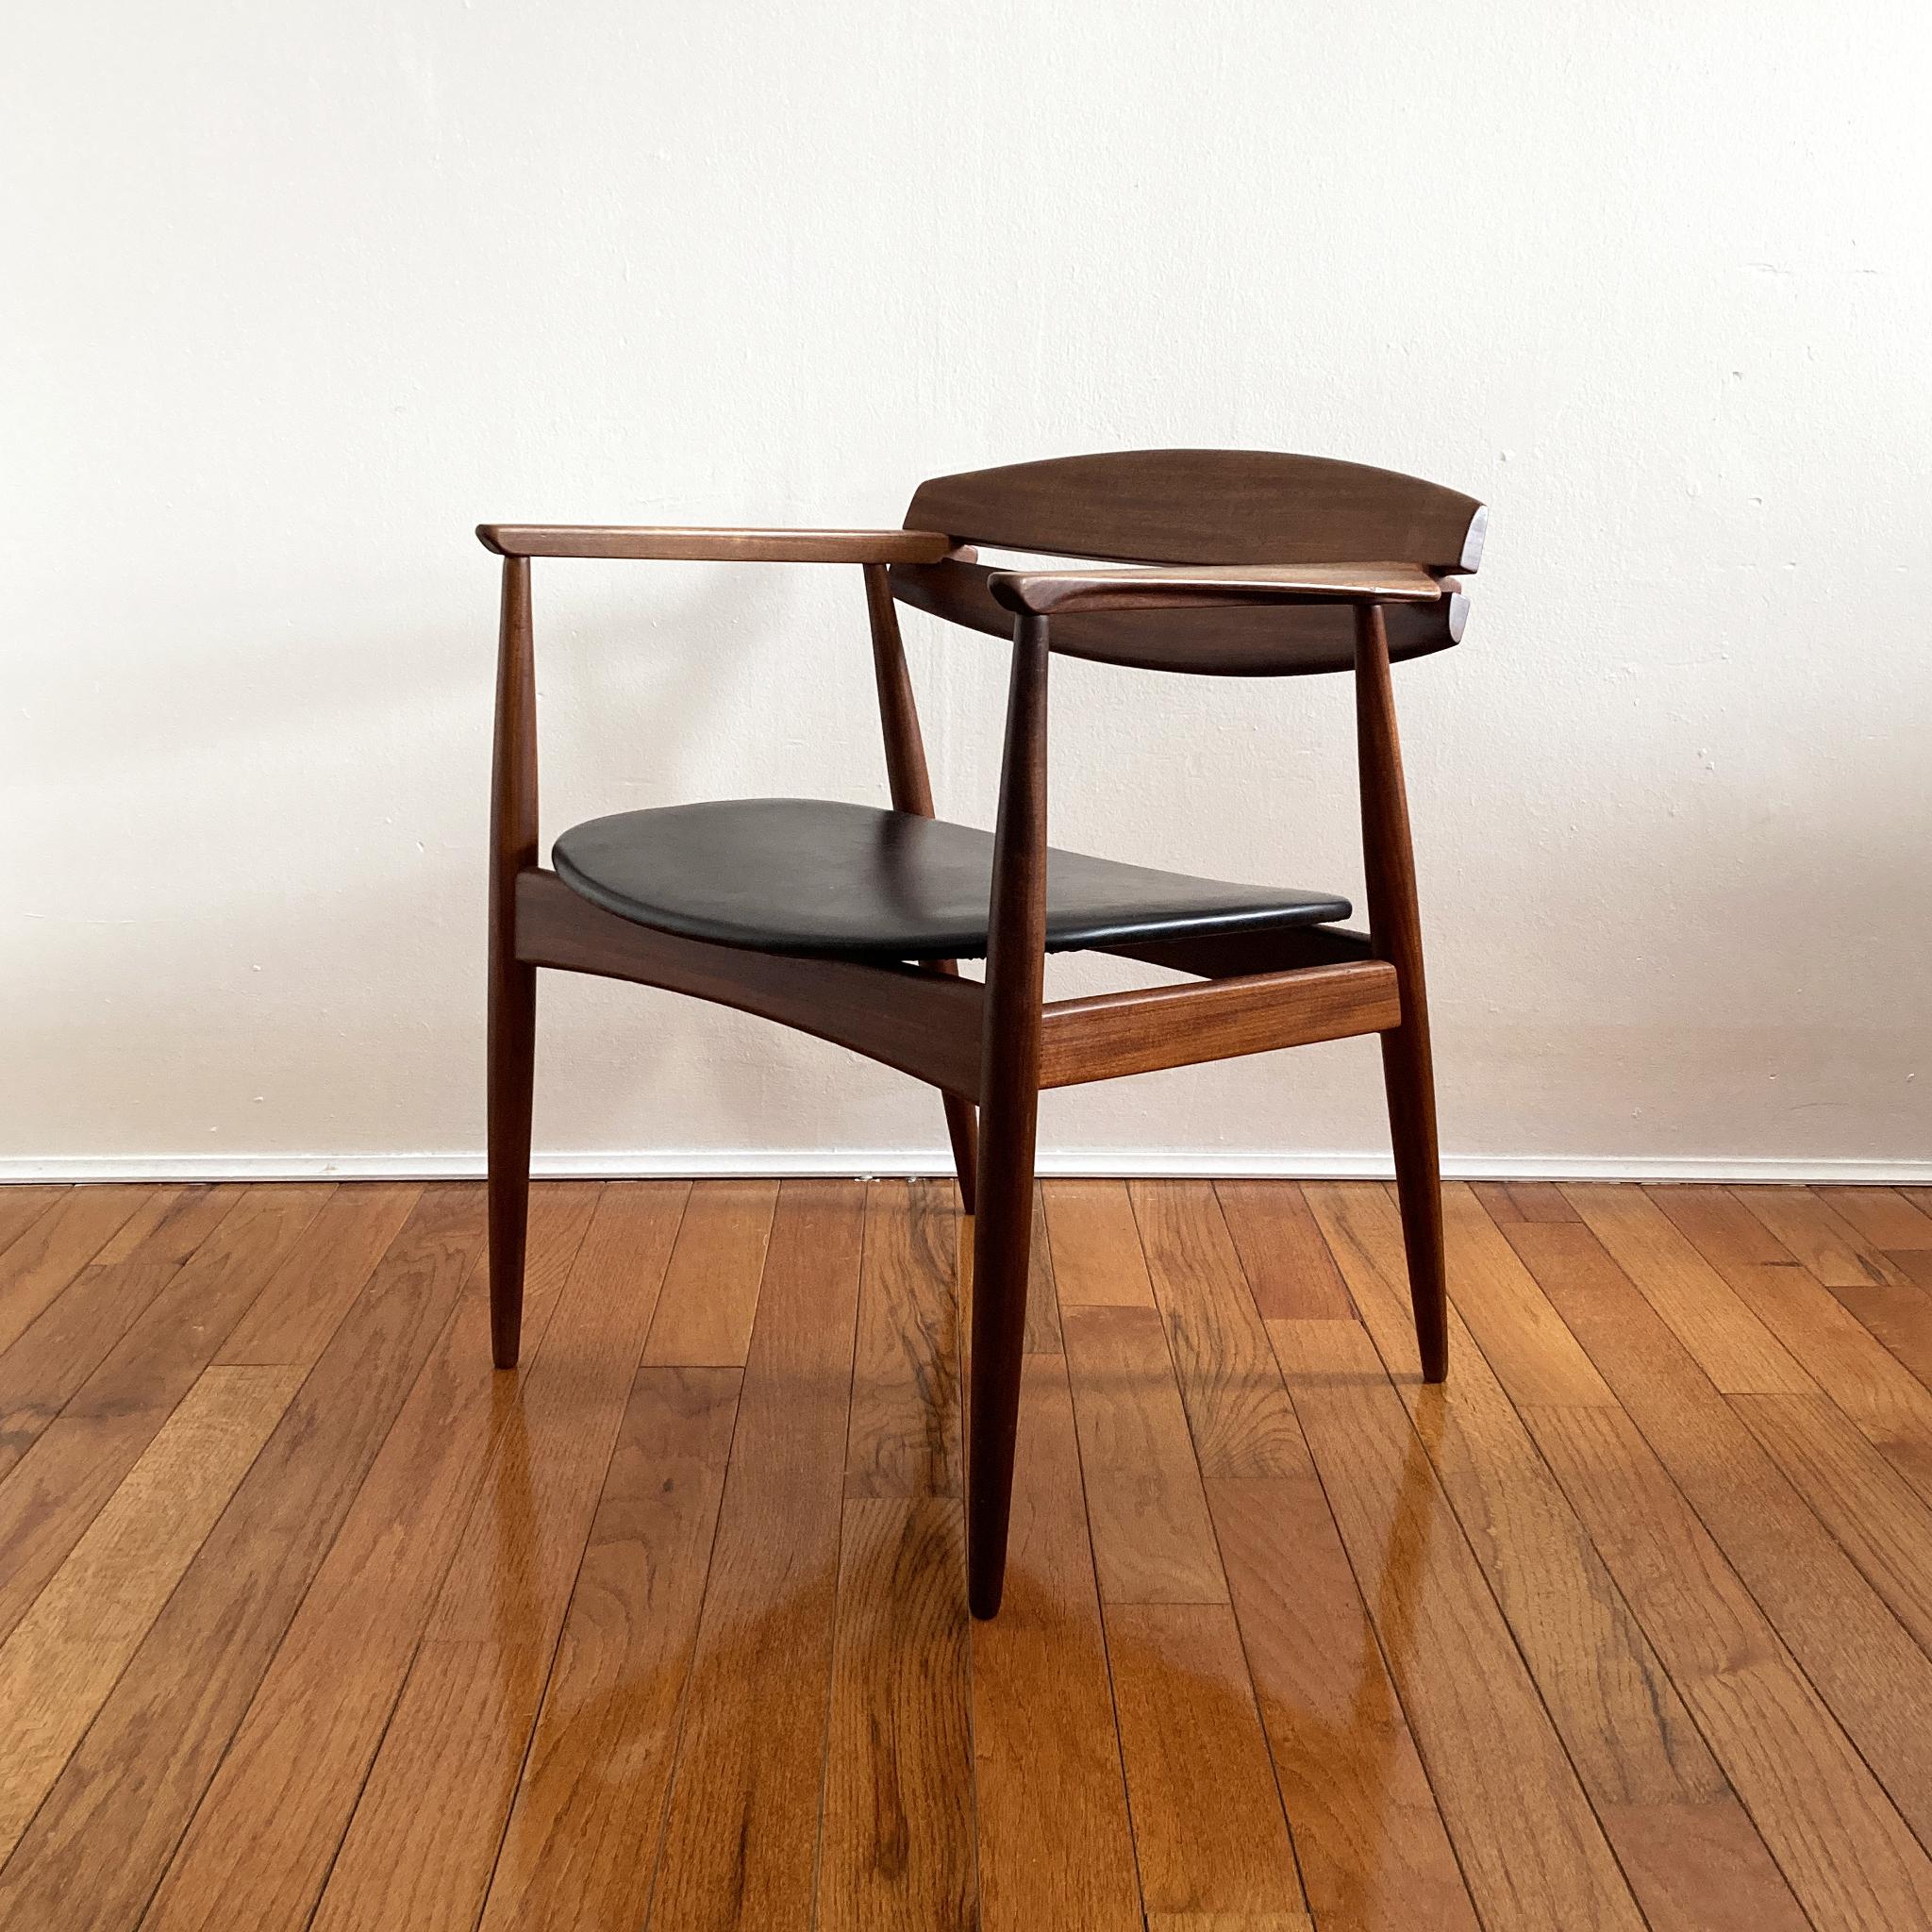 Sylvester & Matz Teak Chair with Black Faux Leather Seat, 1950s For Sale 1